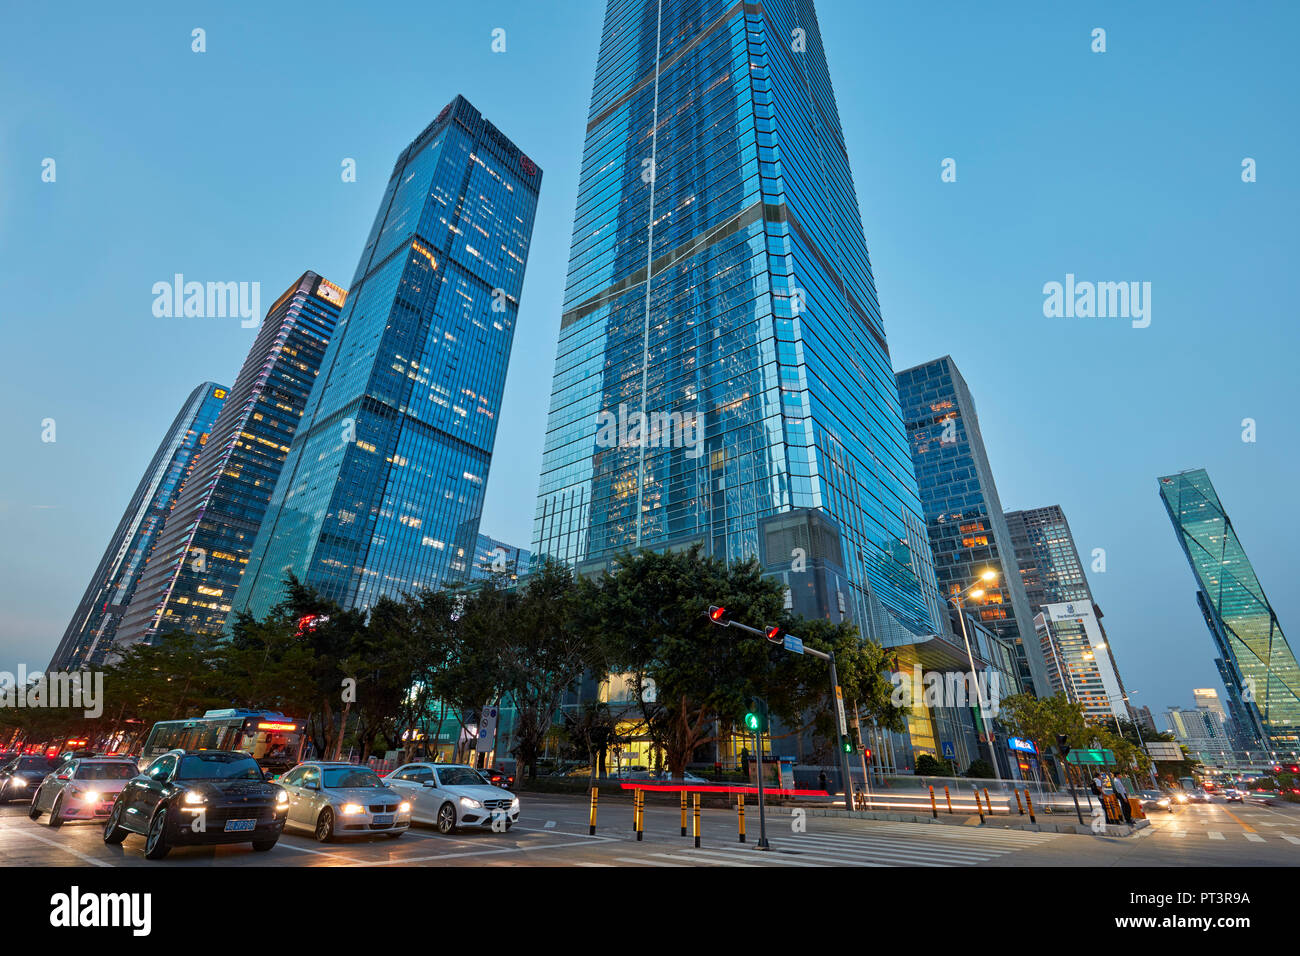 High-rise buildings in Futian Central Business District (CBD) illuminated at dusk. Shenzhen city, Guangdong Province, China. Stock Photo